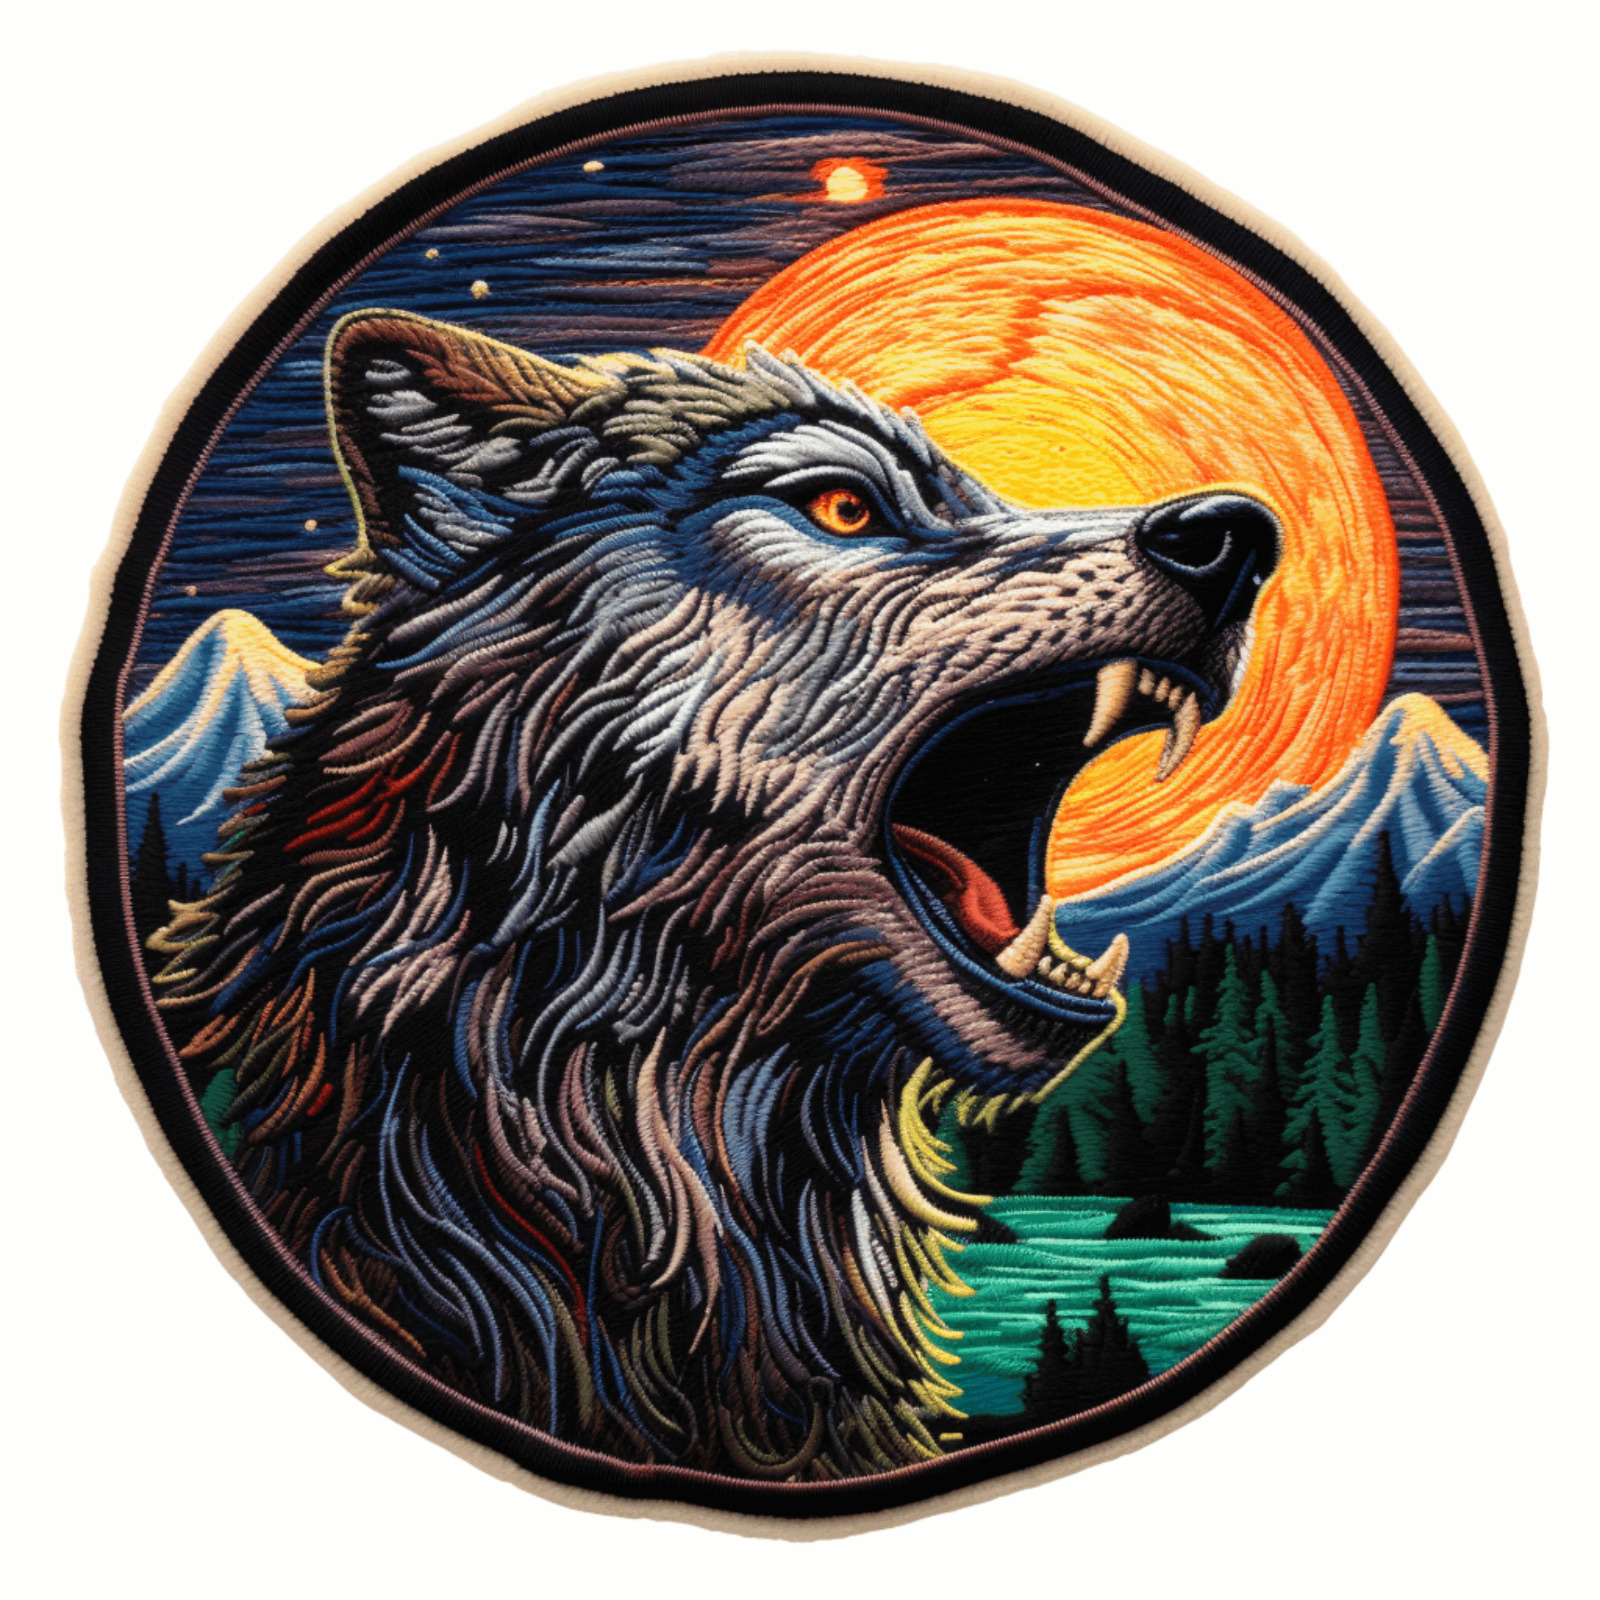 Wolf Patch Iron-on Applique Wild Animal Badge, Howling Snarling Coyote